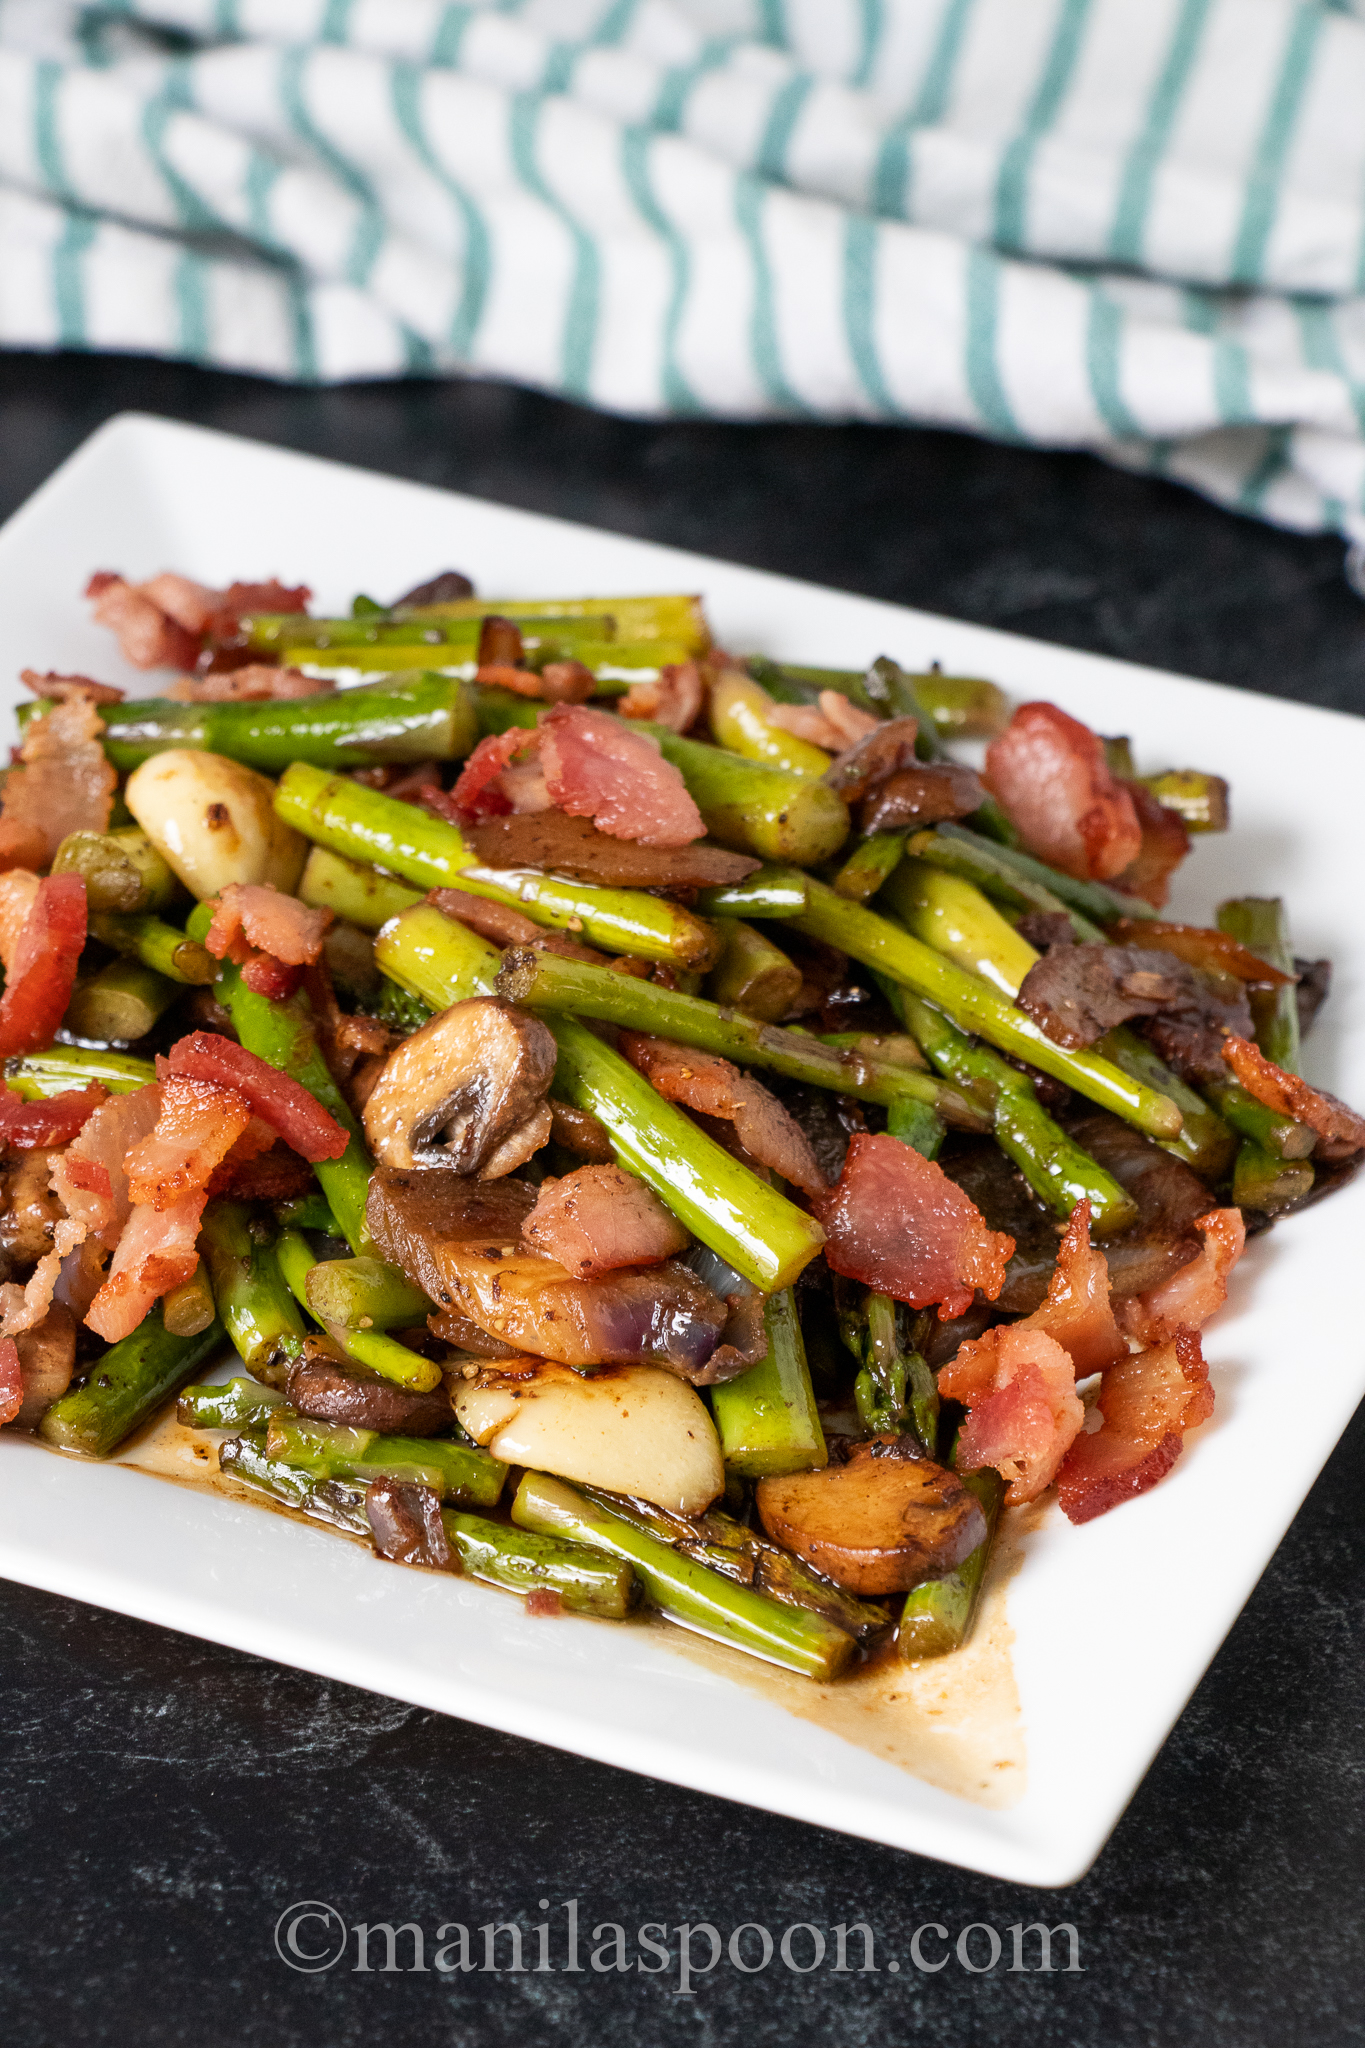 Asparagus with Bacon and Mushrooms